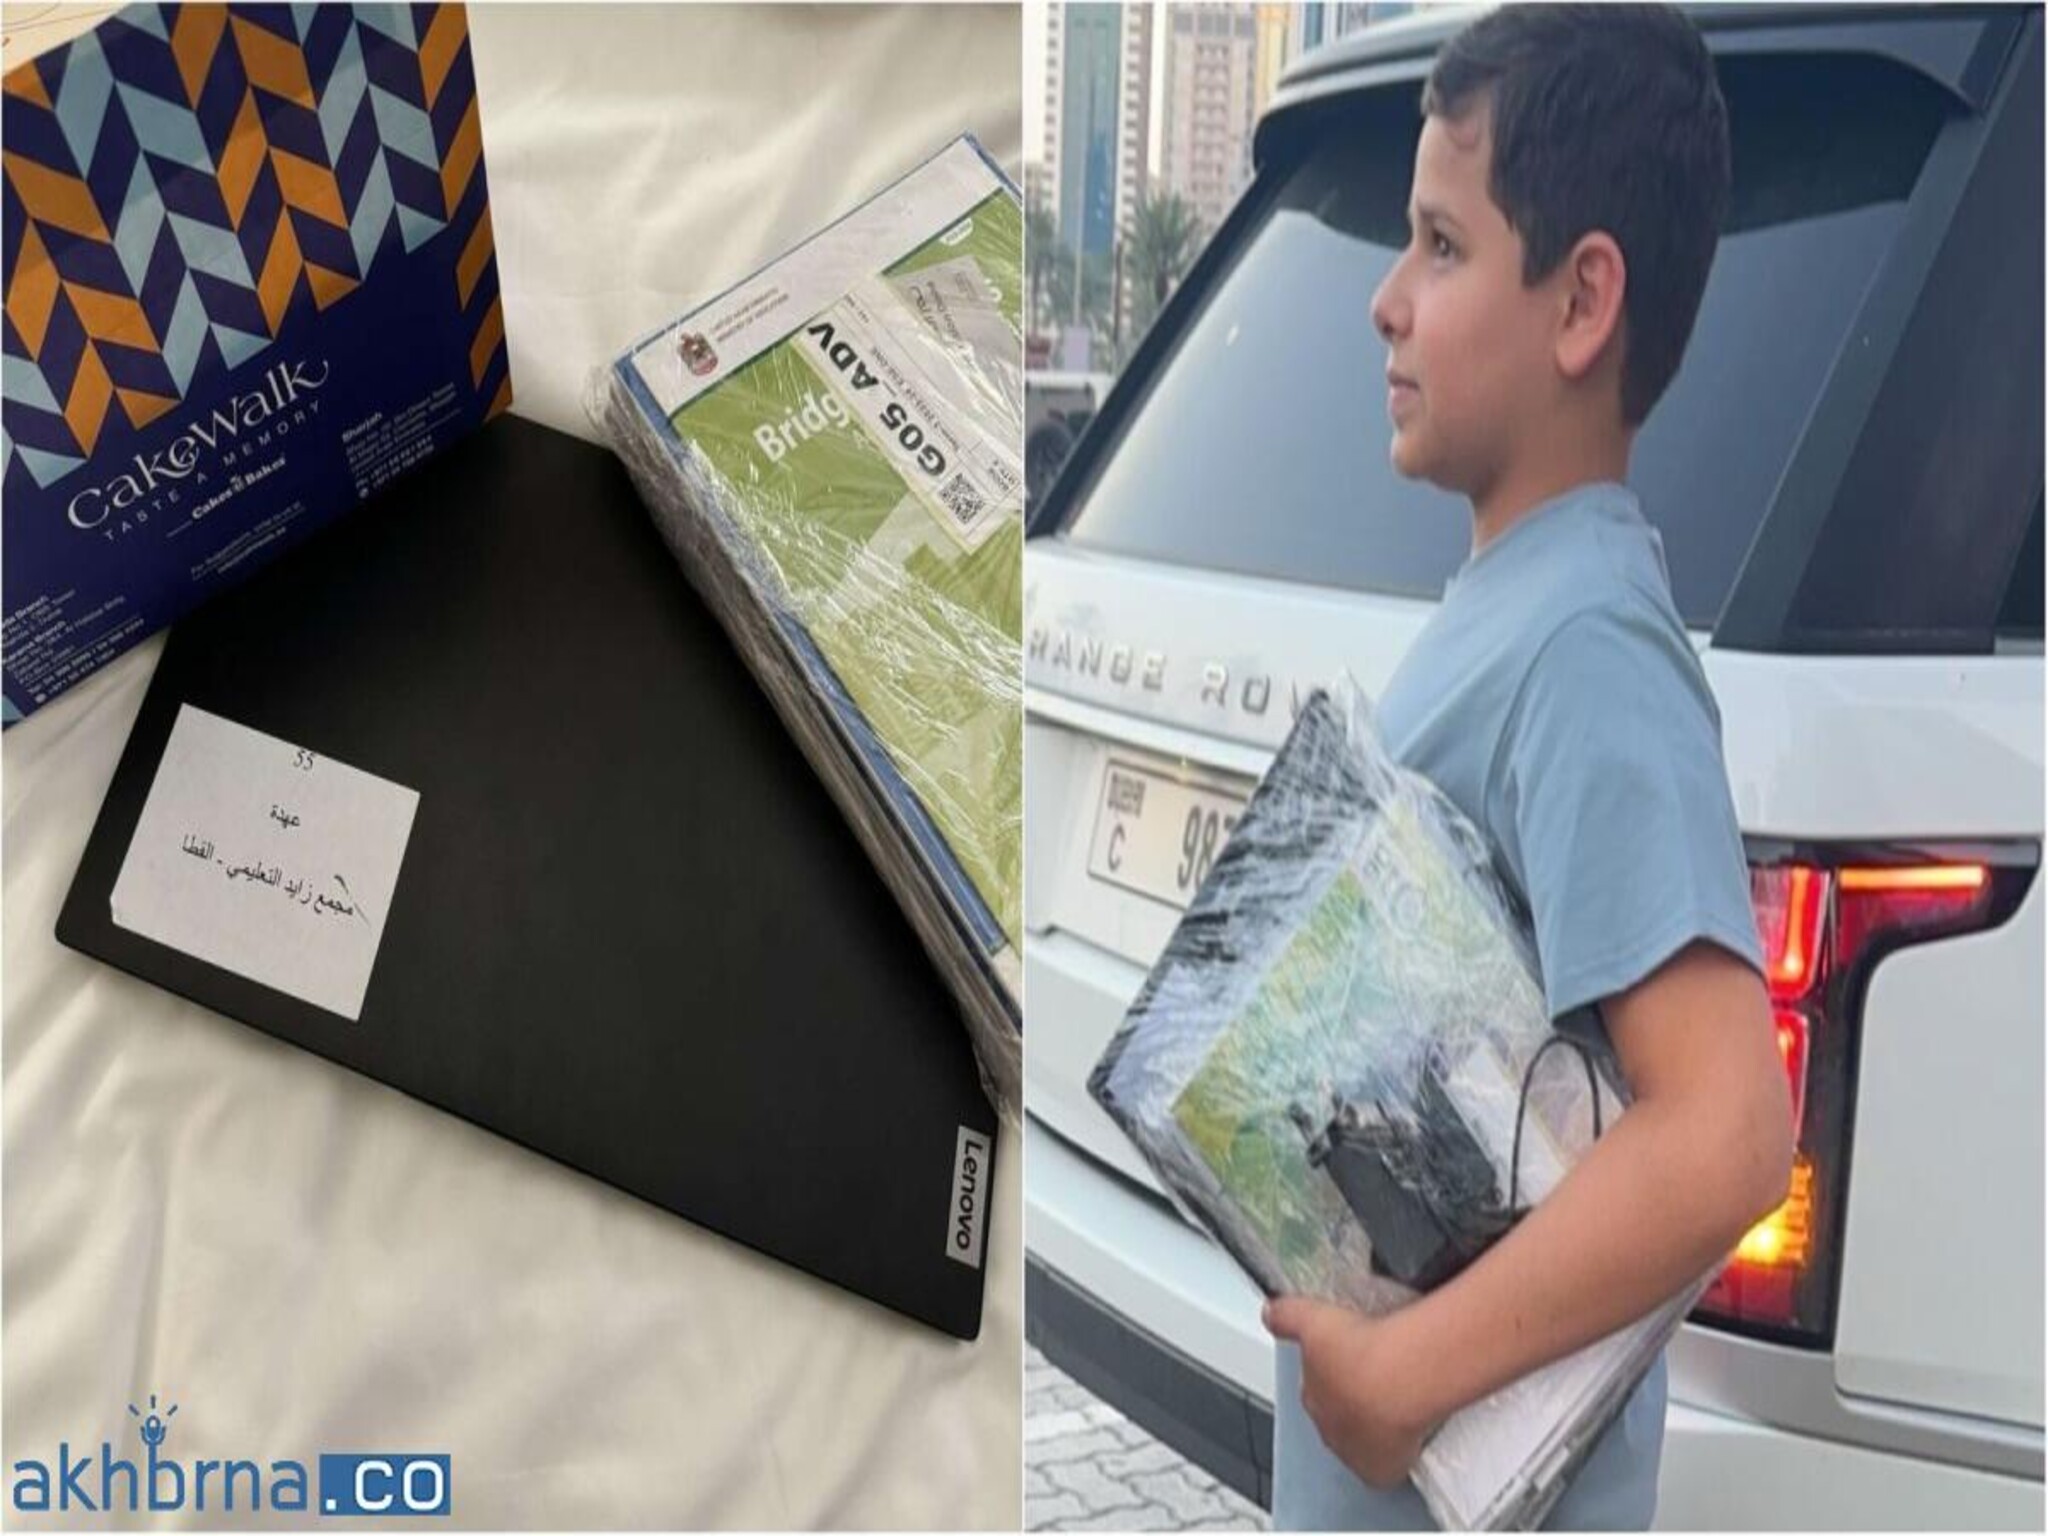 UAE schools send books and laptops to flood-affected students